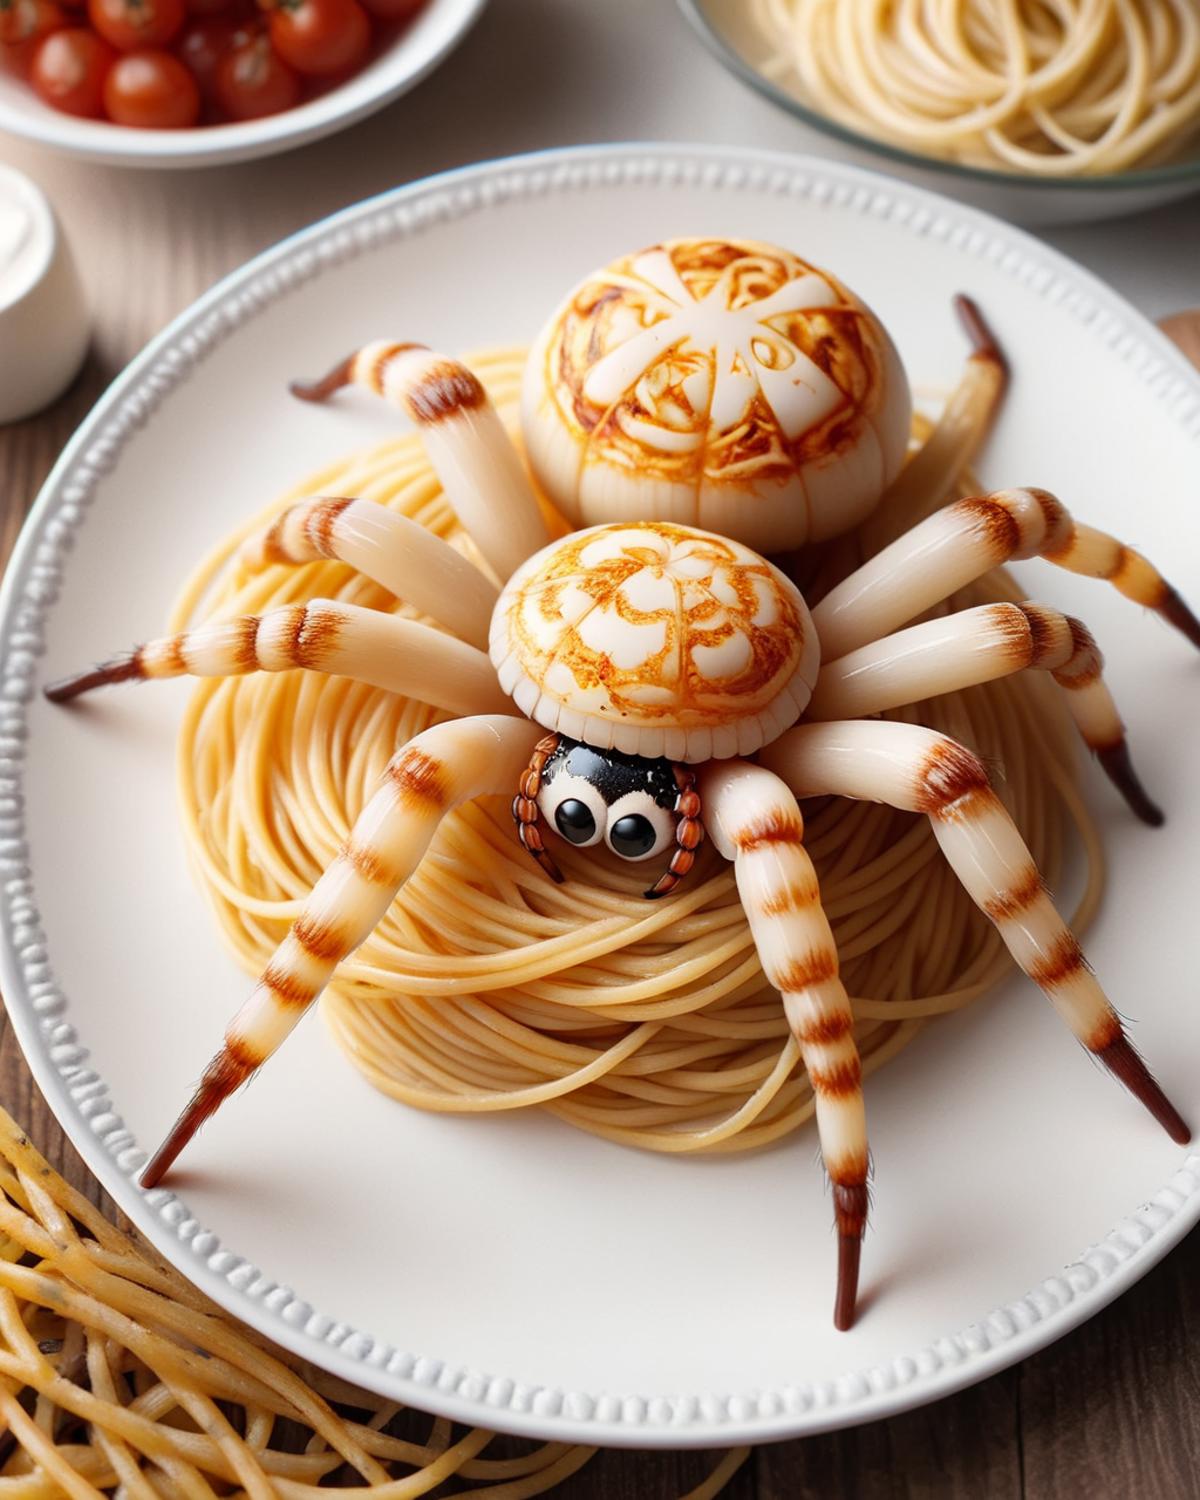 A plate of spaghetti and fake crab legs with creative food art.